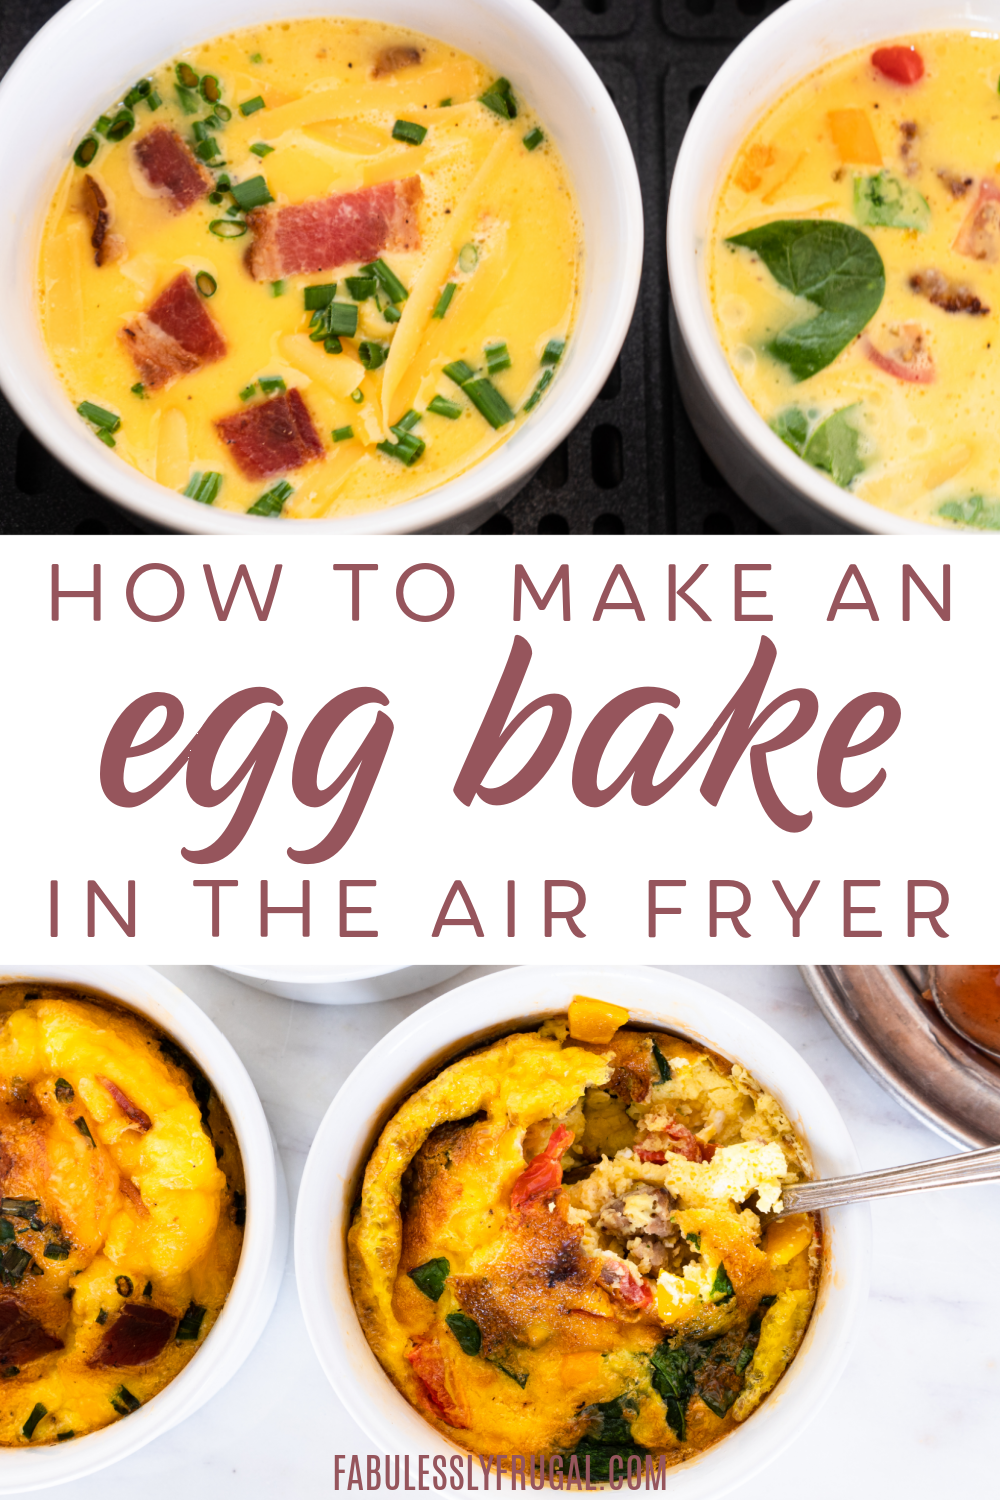 You are going to love this air fryer egg bake recipe because it is simple, tasty, and healthy!